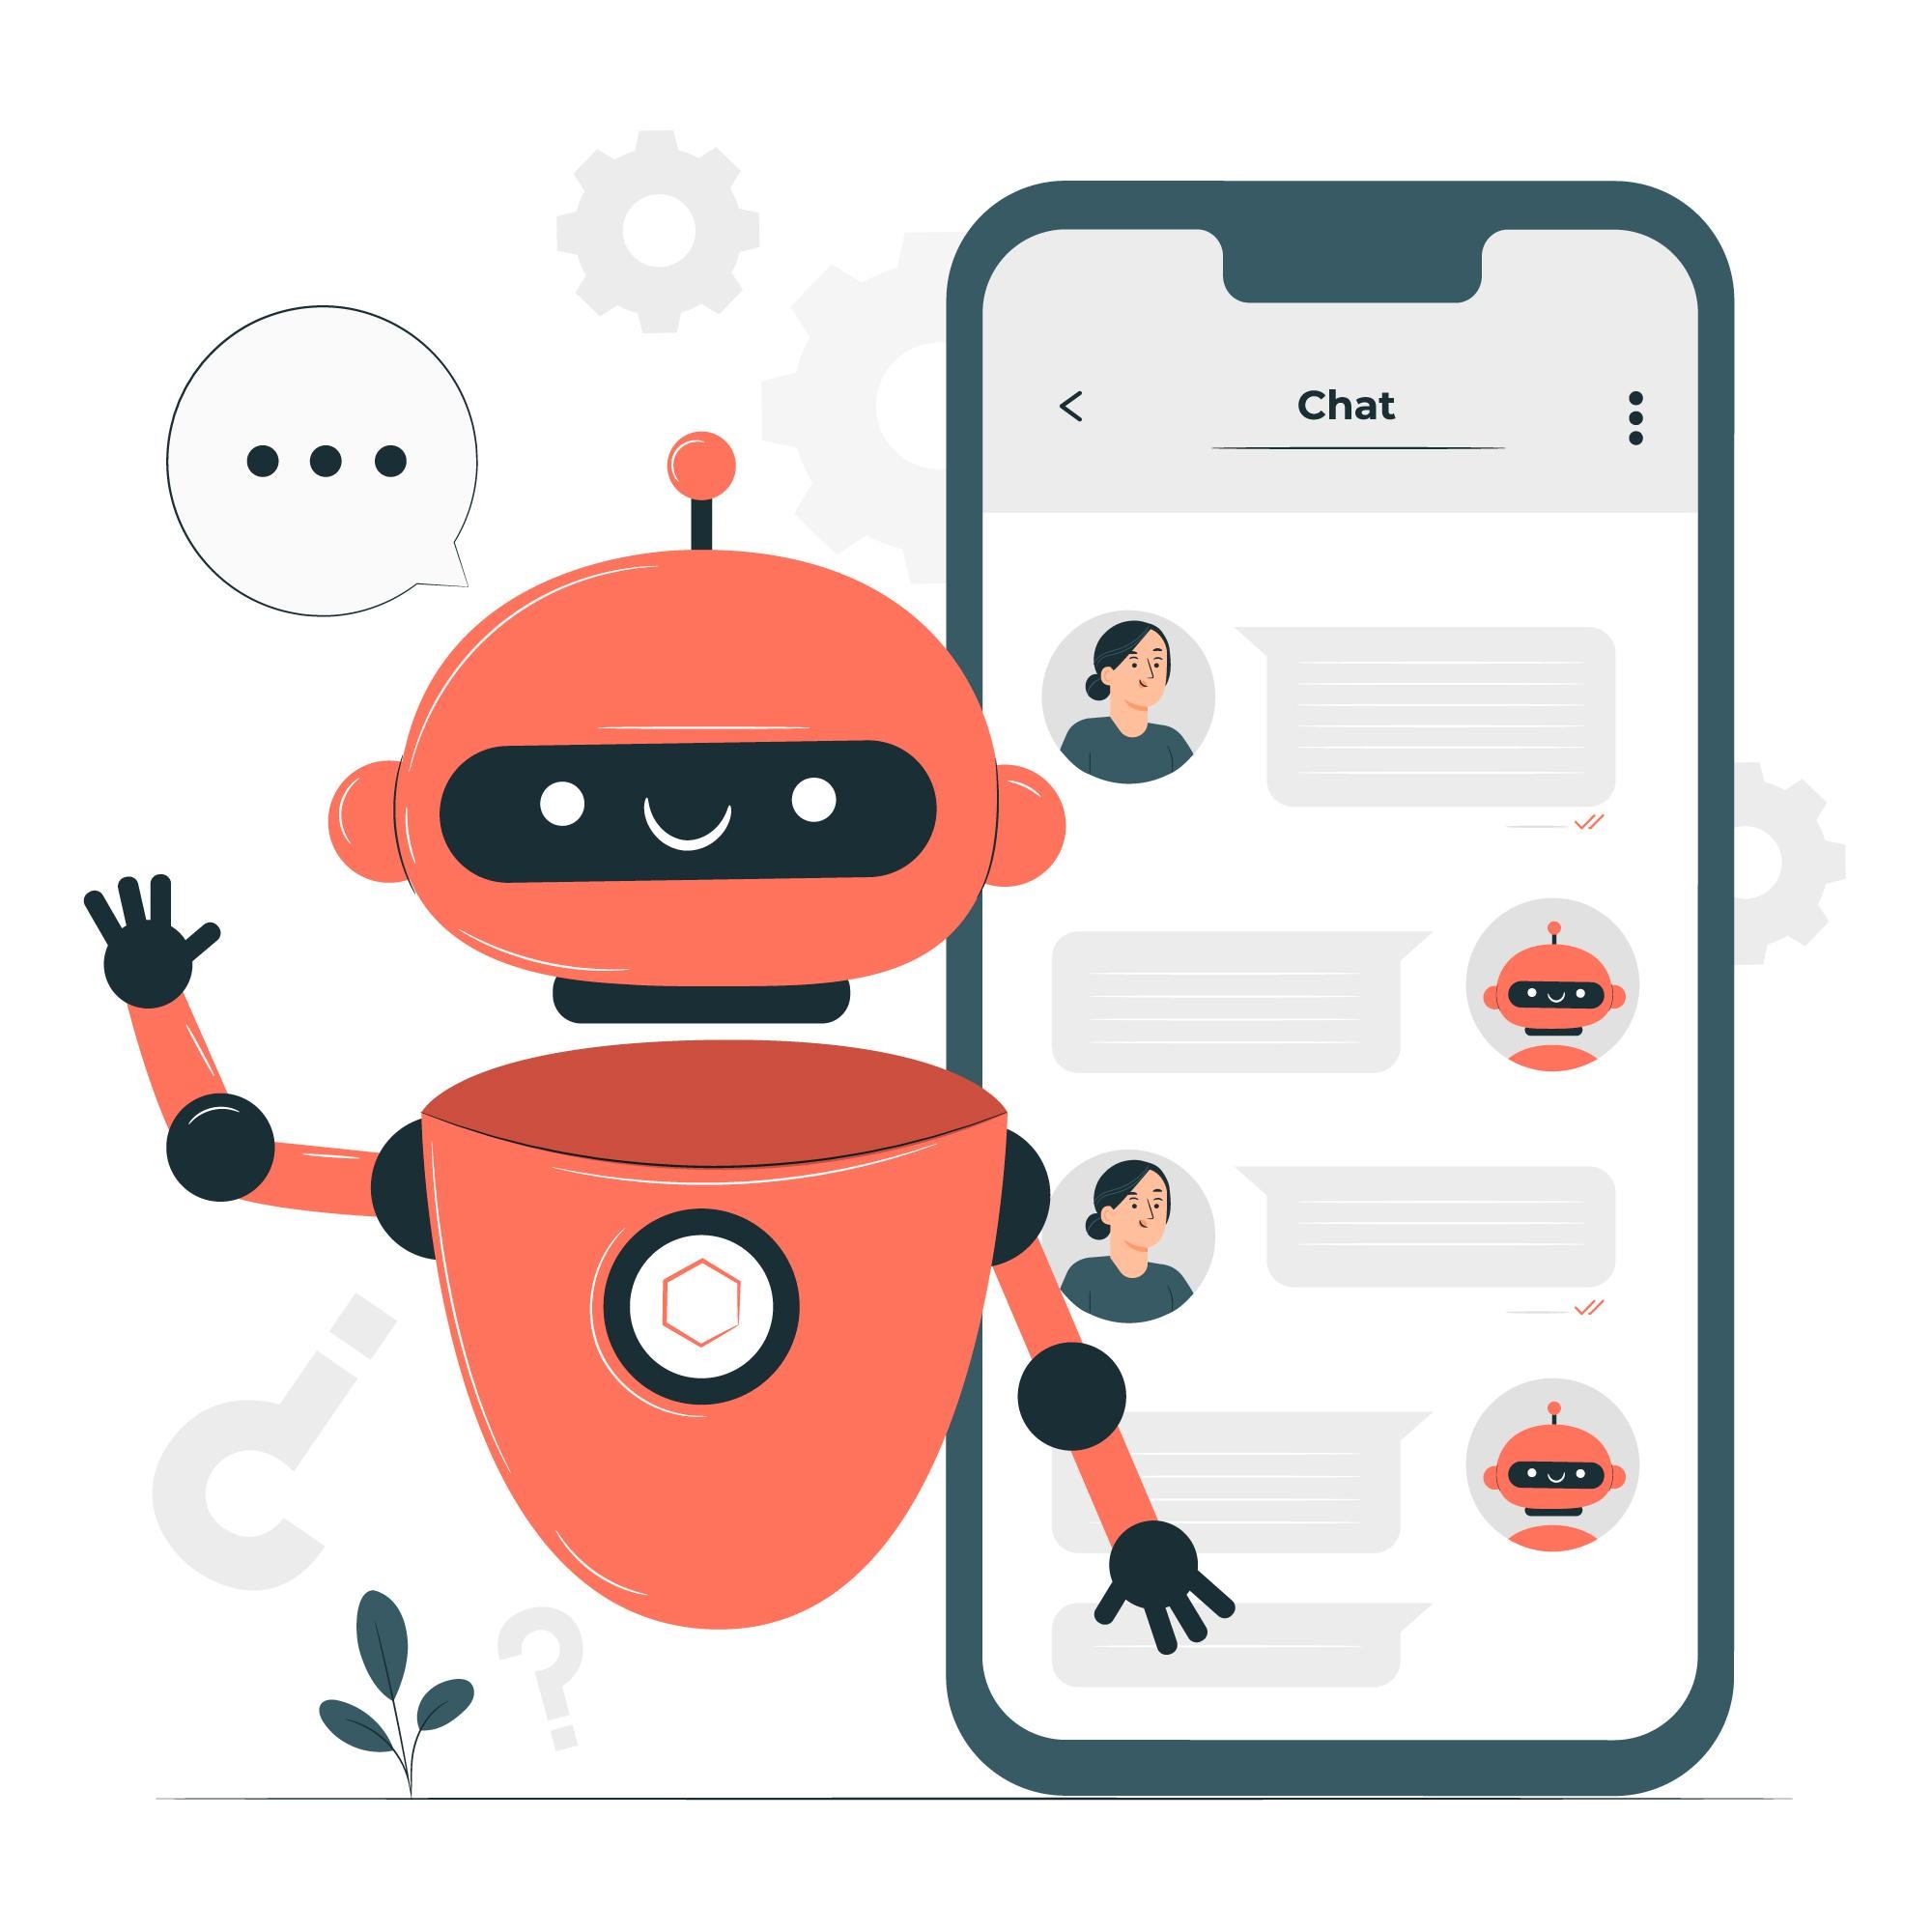 Illustration of a conversation with a chatbot